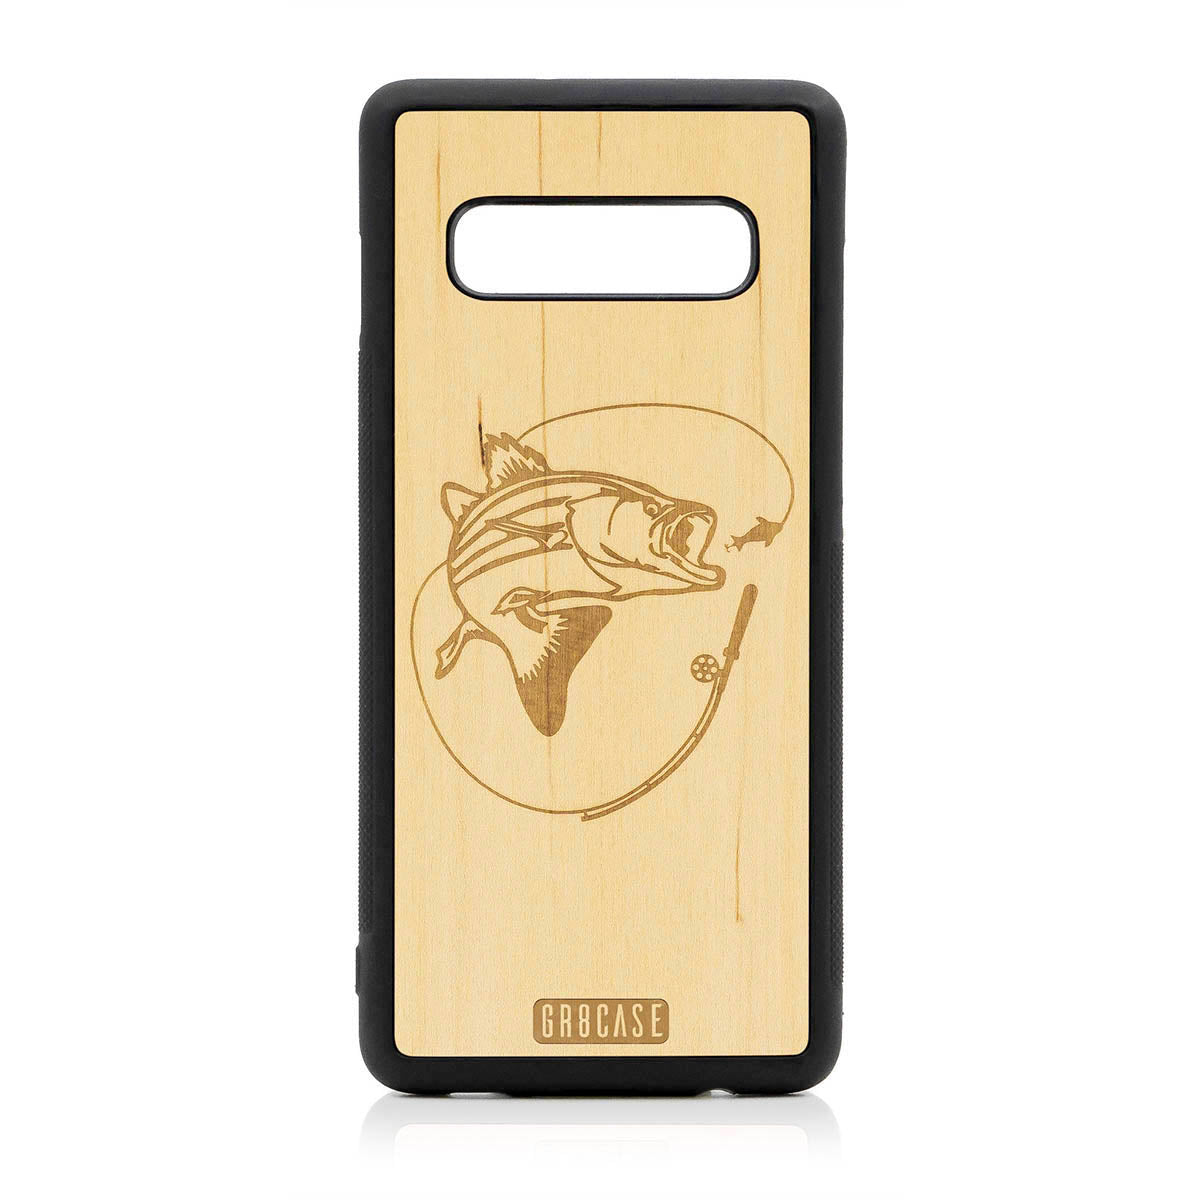 Fish and Reel Design Wood Case For Samsung Galaxy S10 Plus by GR8CASE